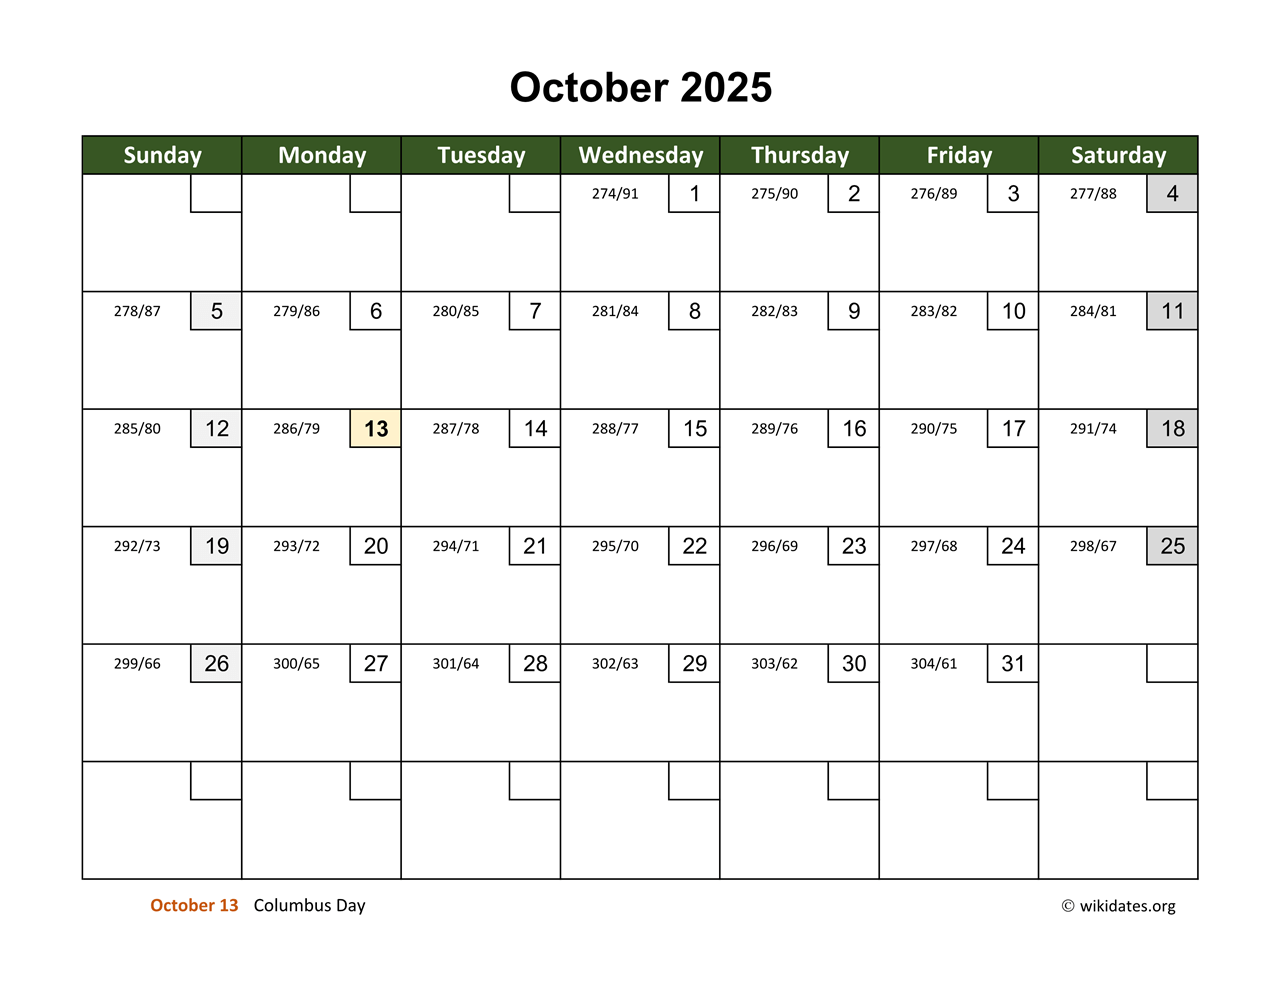 October 2025 Calendar with Day Numbers  WikiDates.org